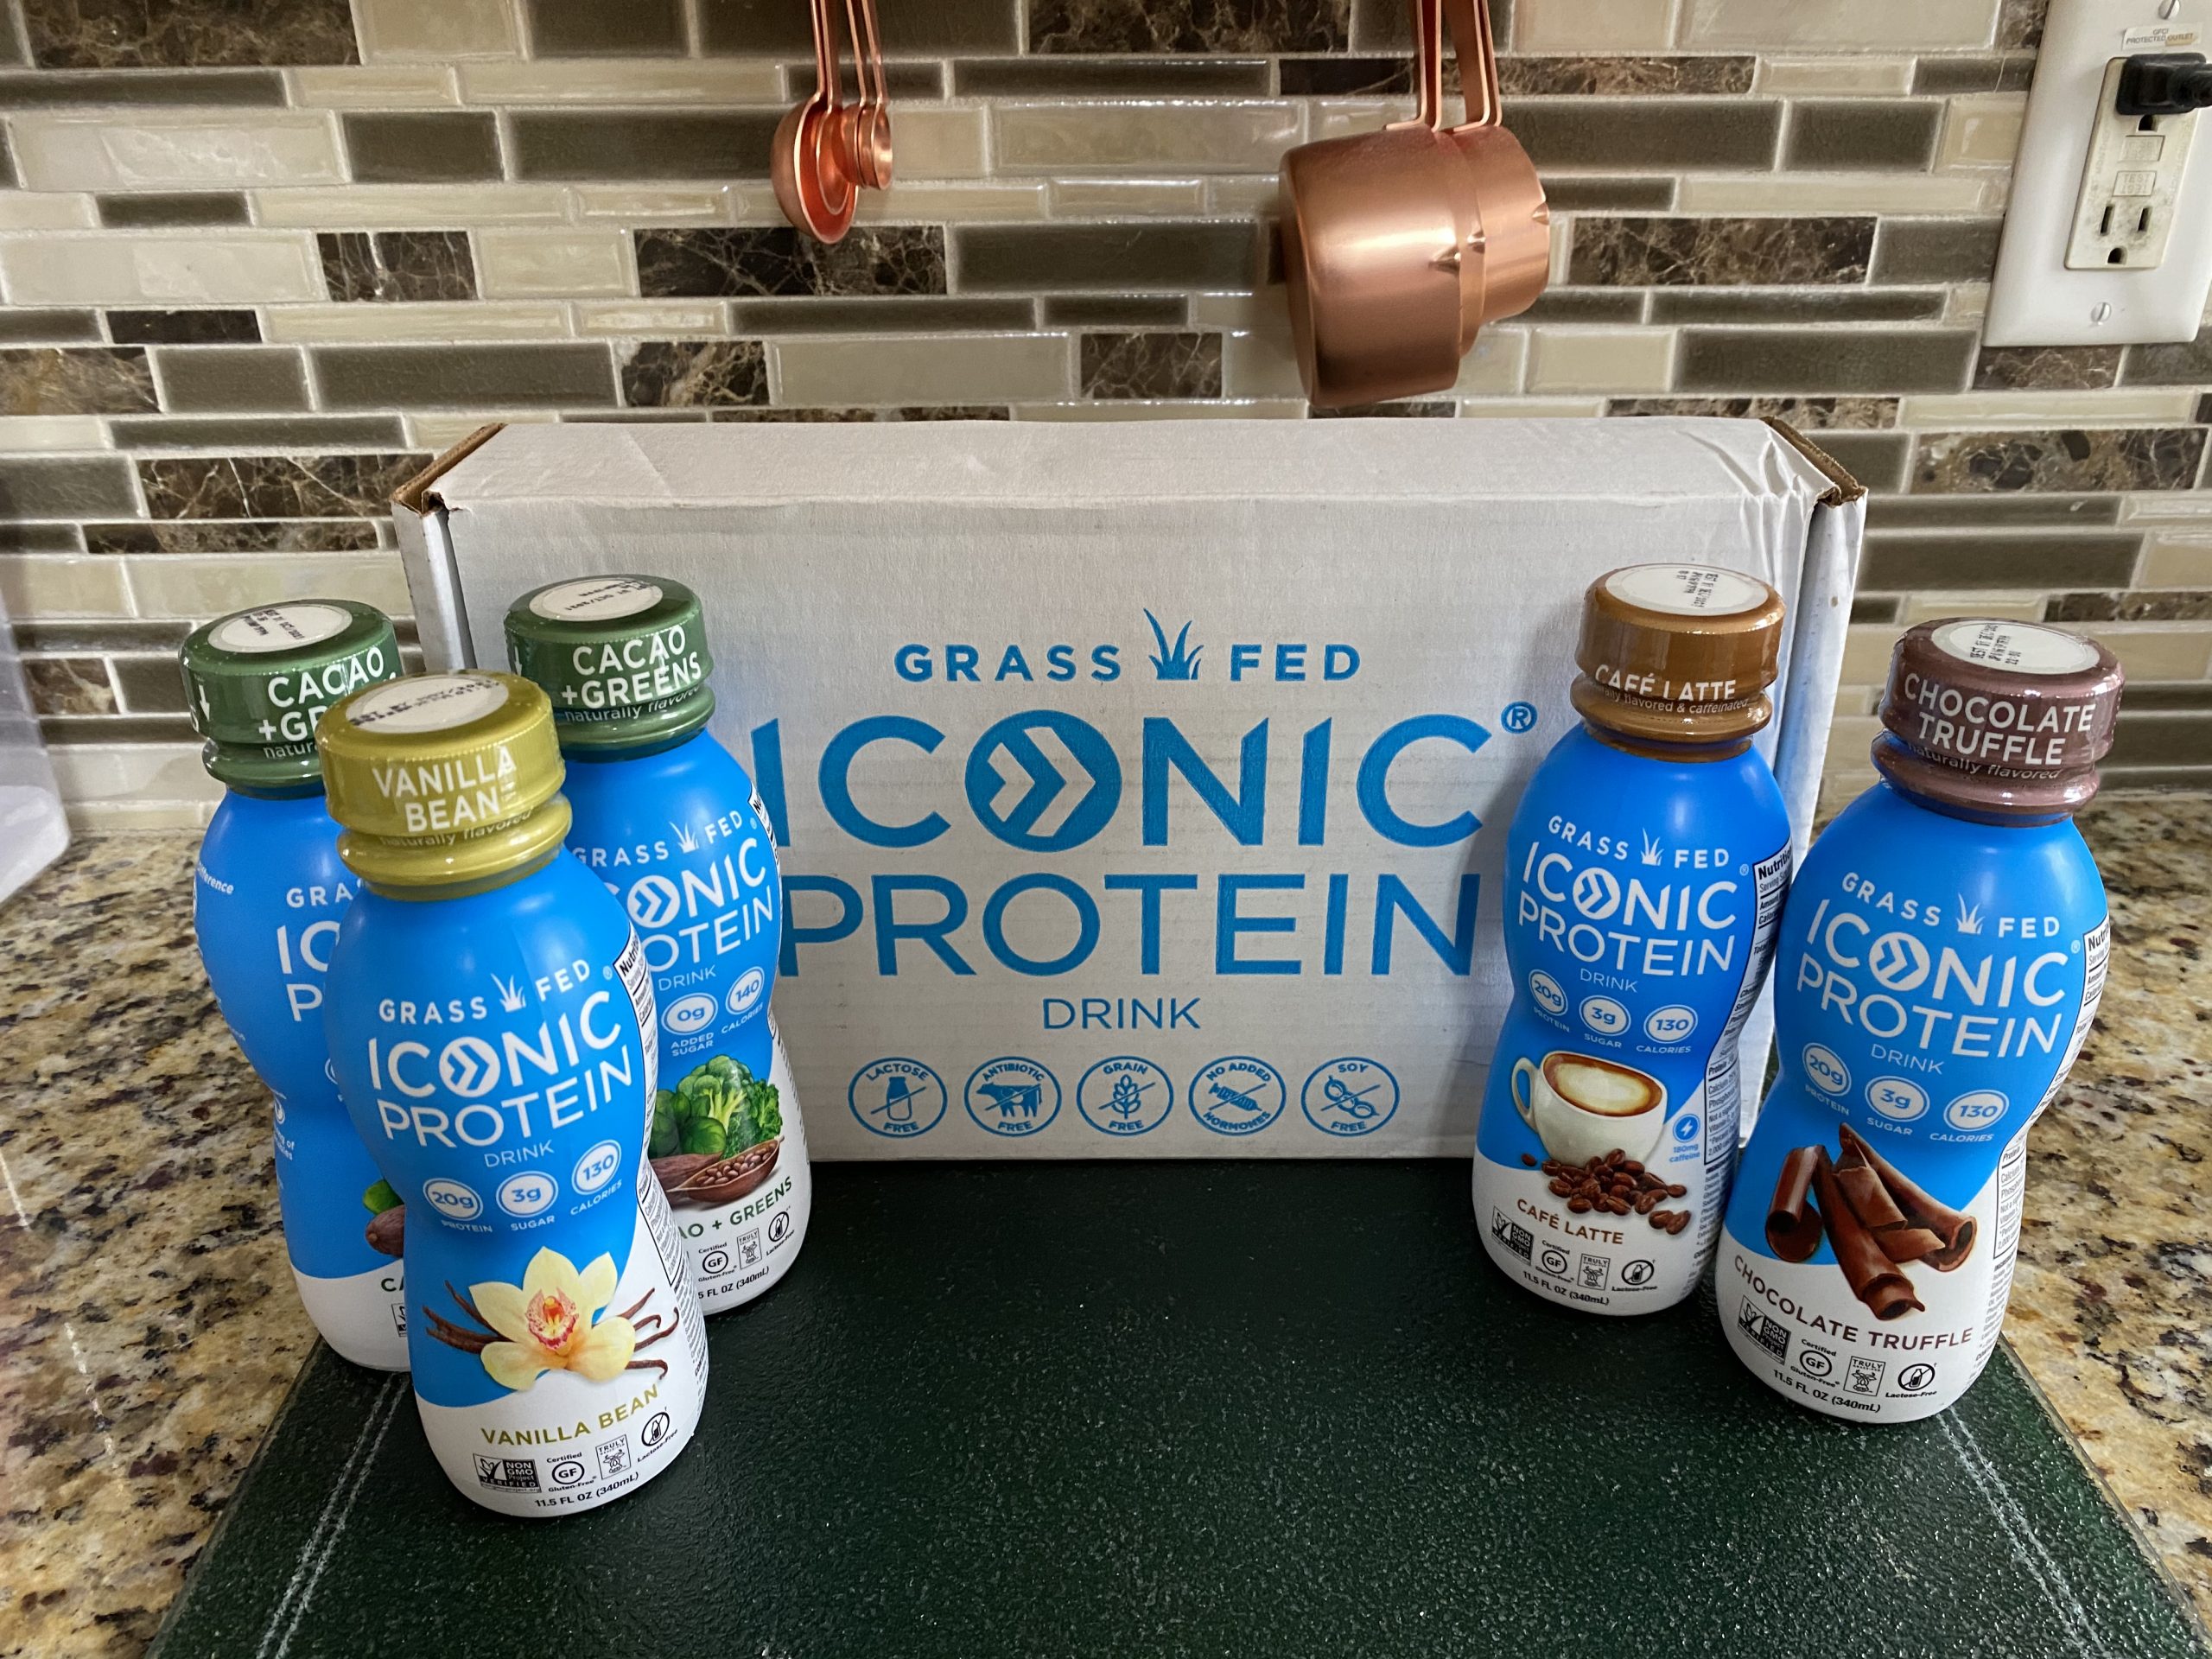 Iconic Grass Fed Protein Drink, Review of ALL 4 Flavors